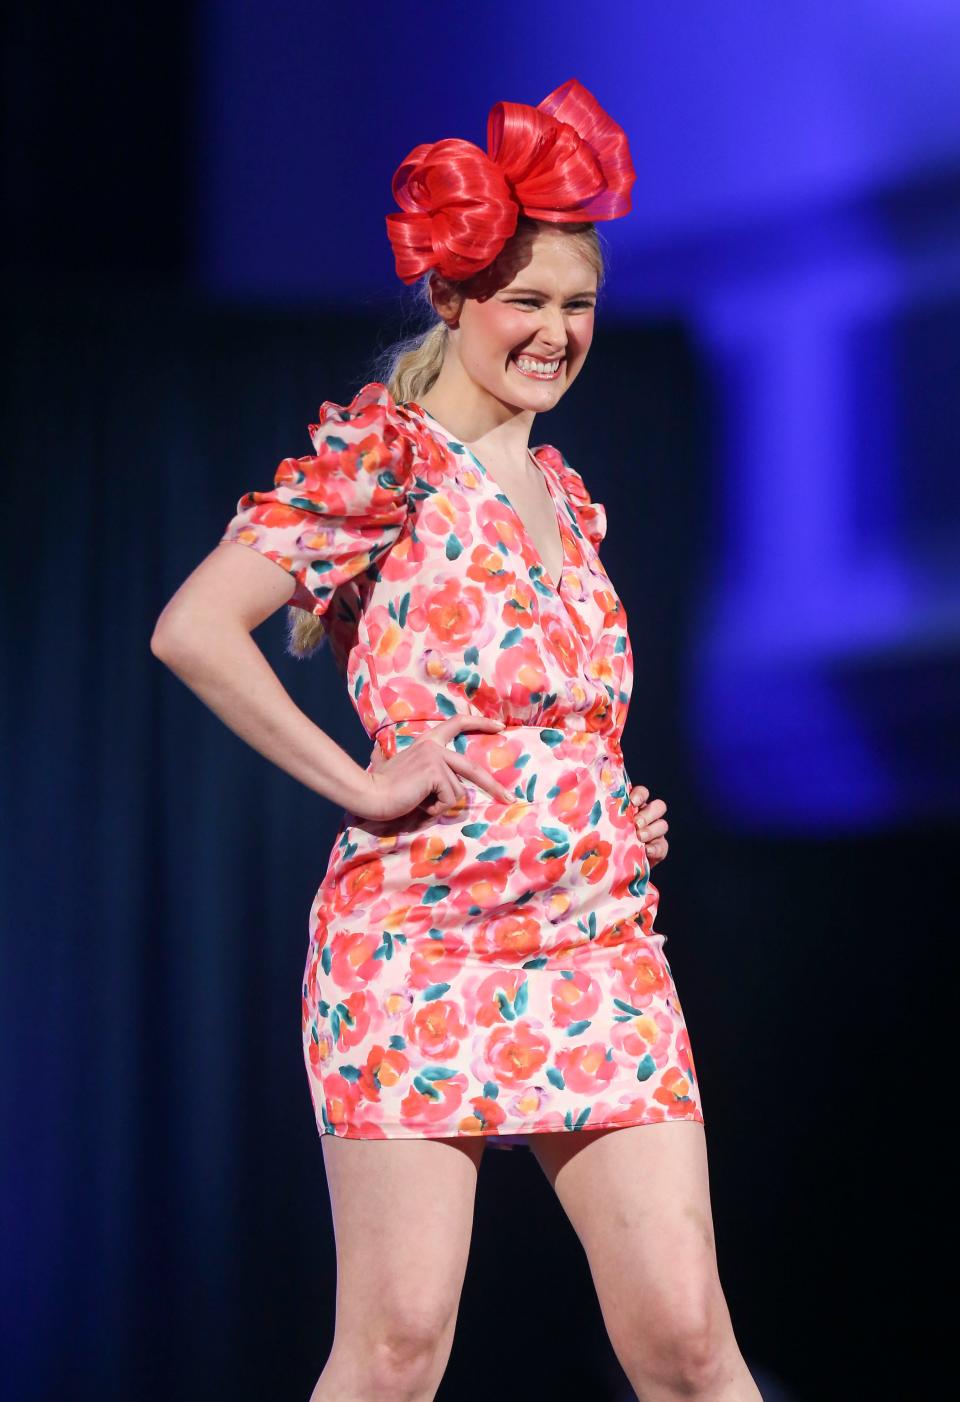 The 2022 Kentucky Derby Festival/Macy's Spring Fashion Show at Caesars Southern Indiana Thursday night. Local boutiques included AFM Threads, Charlie’s Boutique, Da•da Apparel Co., Darling State of Mind, GUESS?, Inc., Magnolia & Fig, Mamili, Noted, Pretty Is As Pretty Does, Sapphire Boutique and That Cute Little Shop. Today's Woman and WHAS11 were media sponsors. Millennium Events produced the show. March 31, 2022